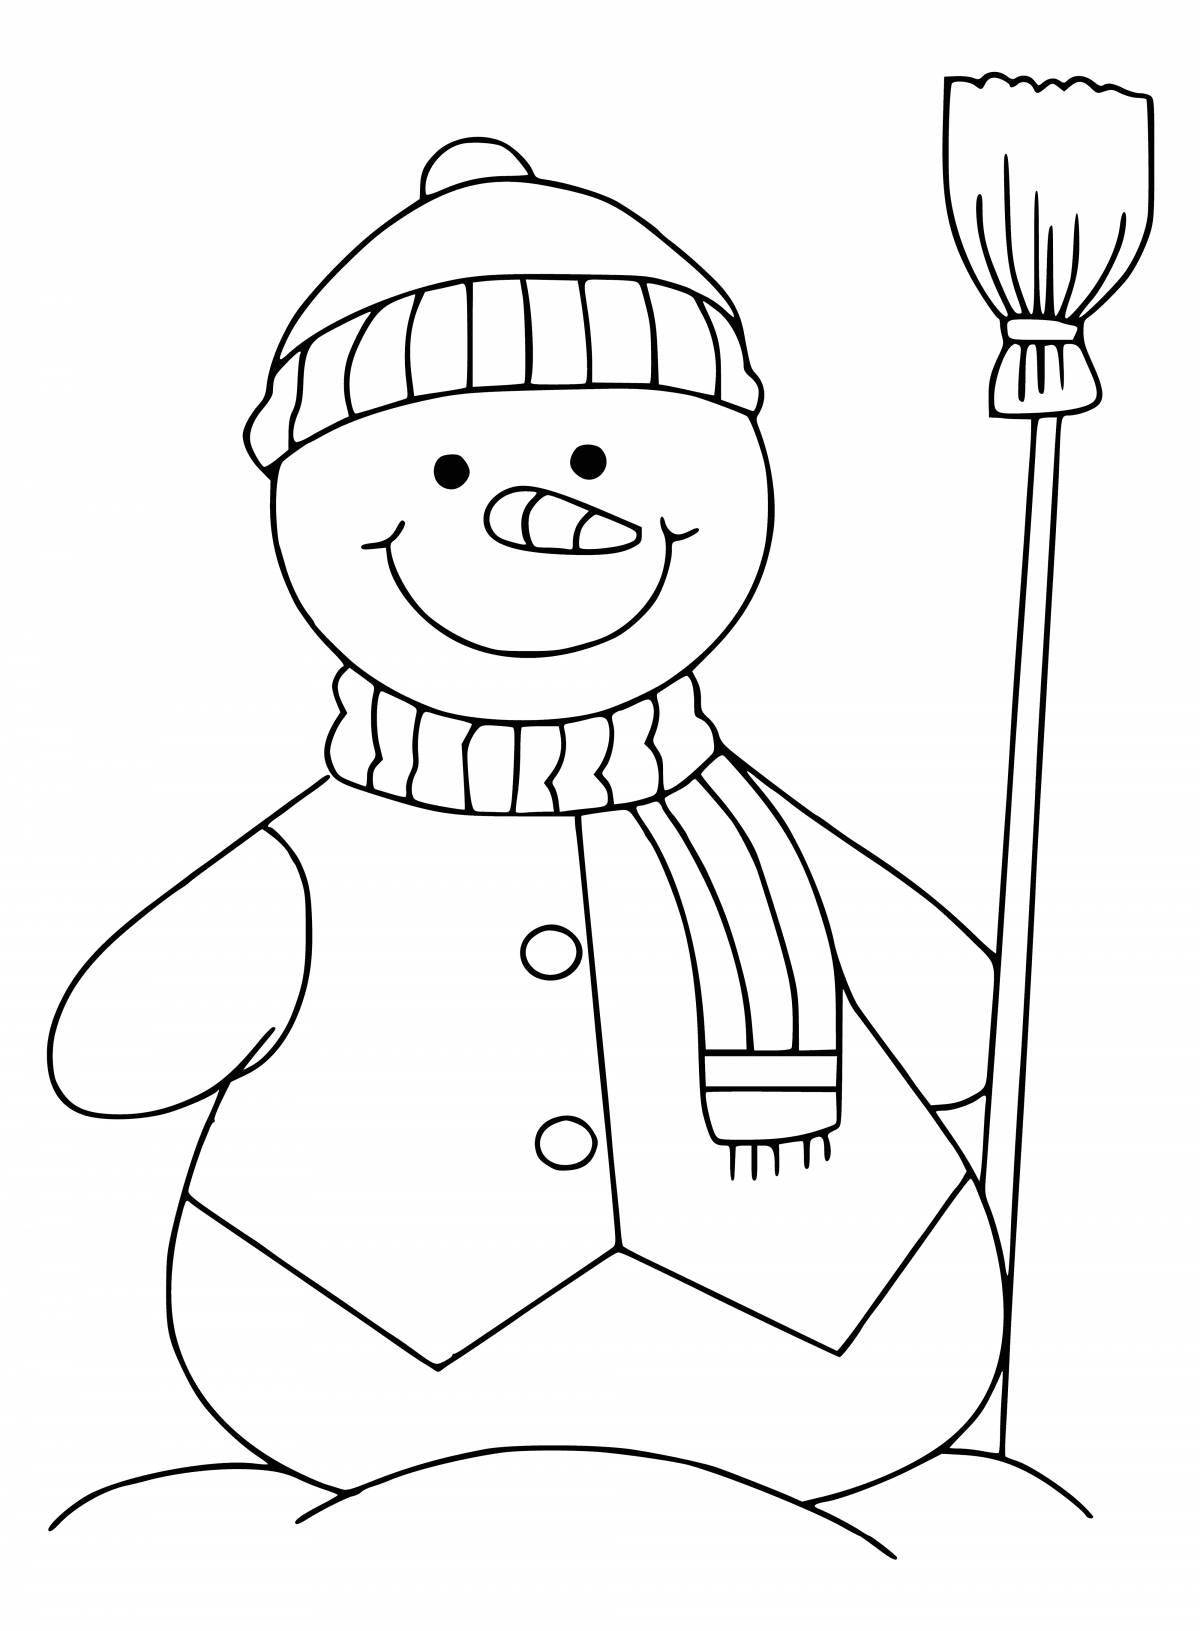 Magic snowman day coloring page